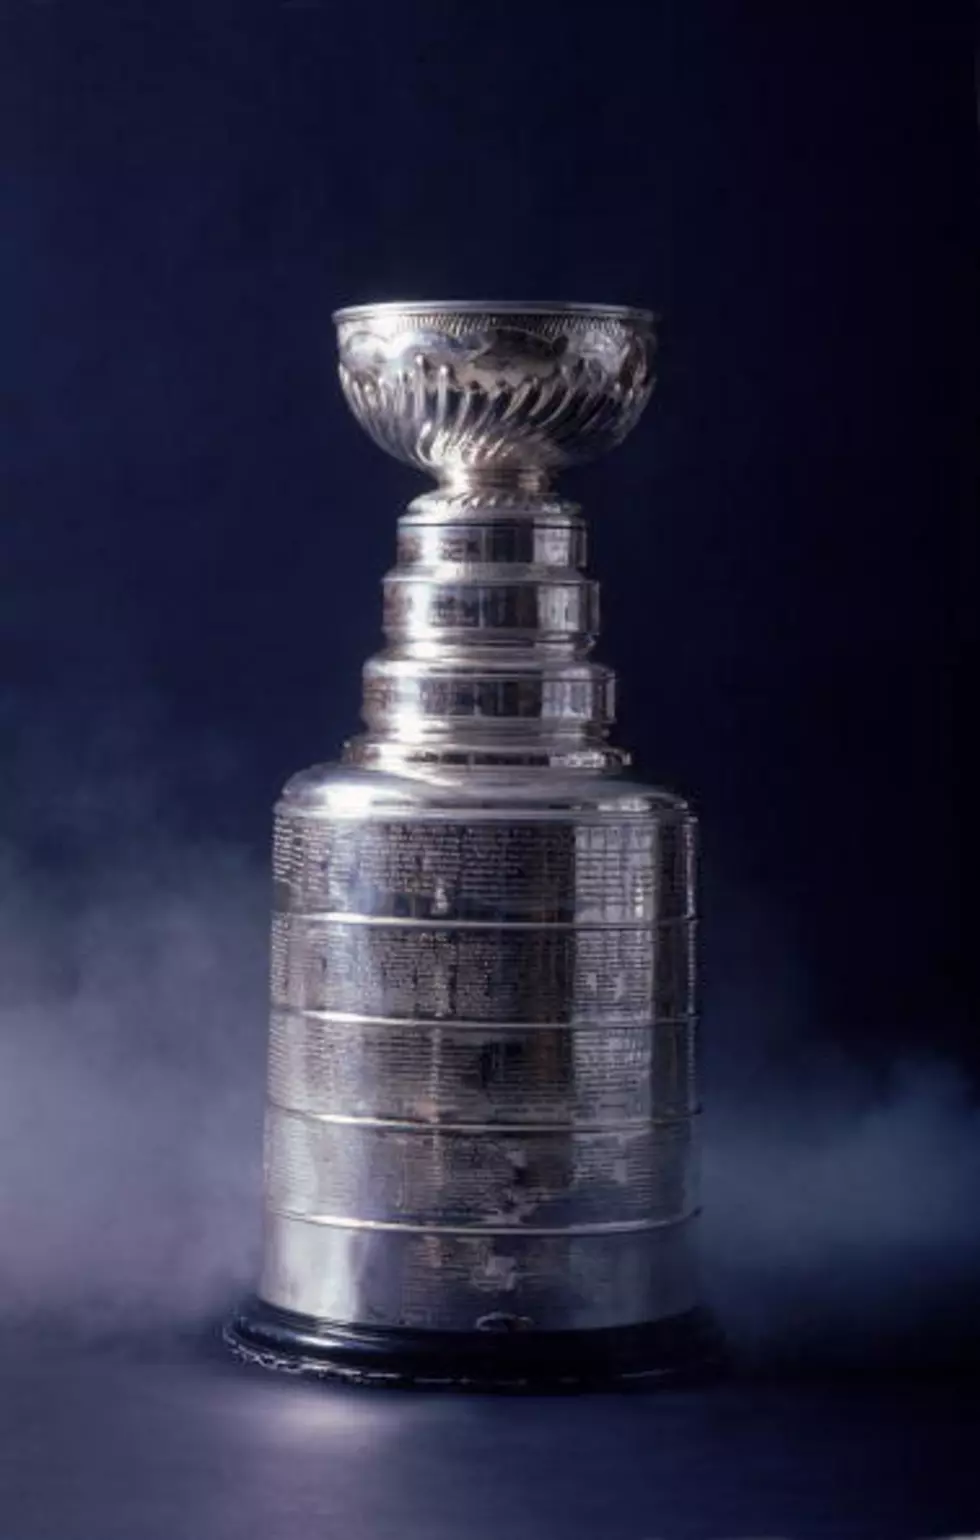 Stanley Cup in Buffalo!